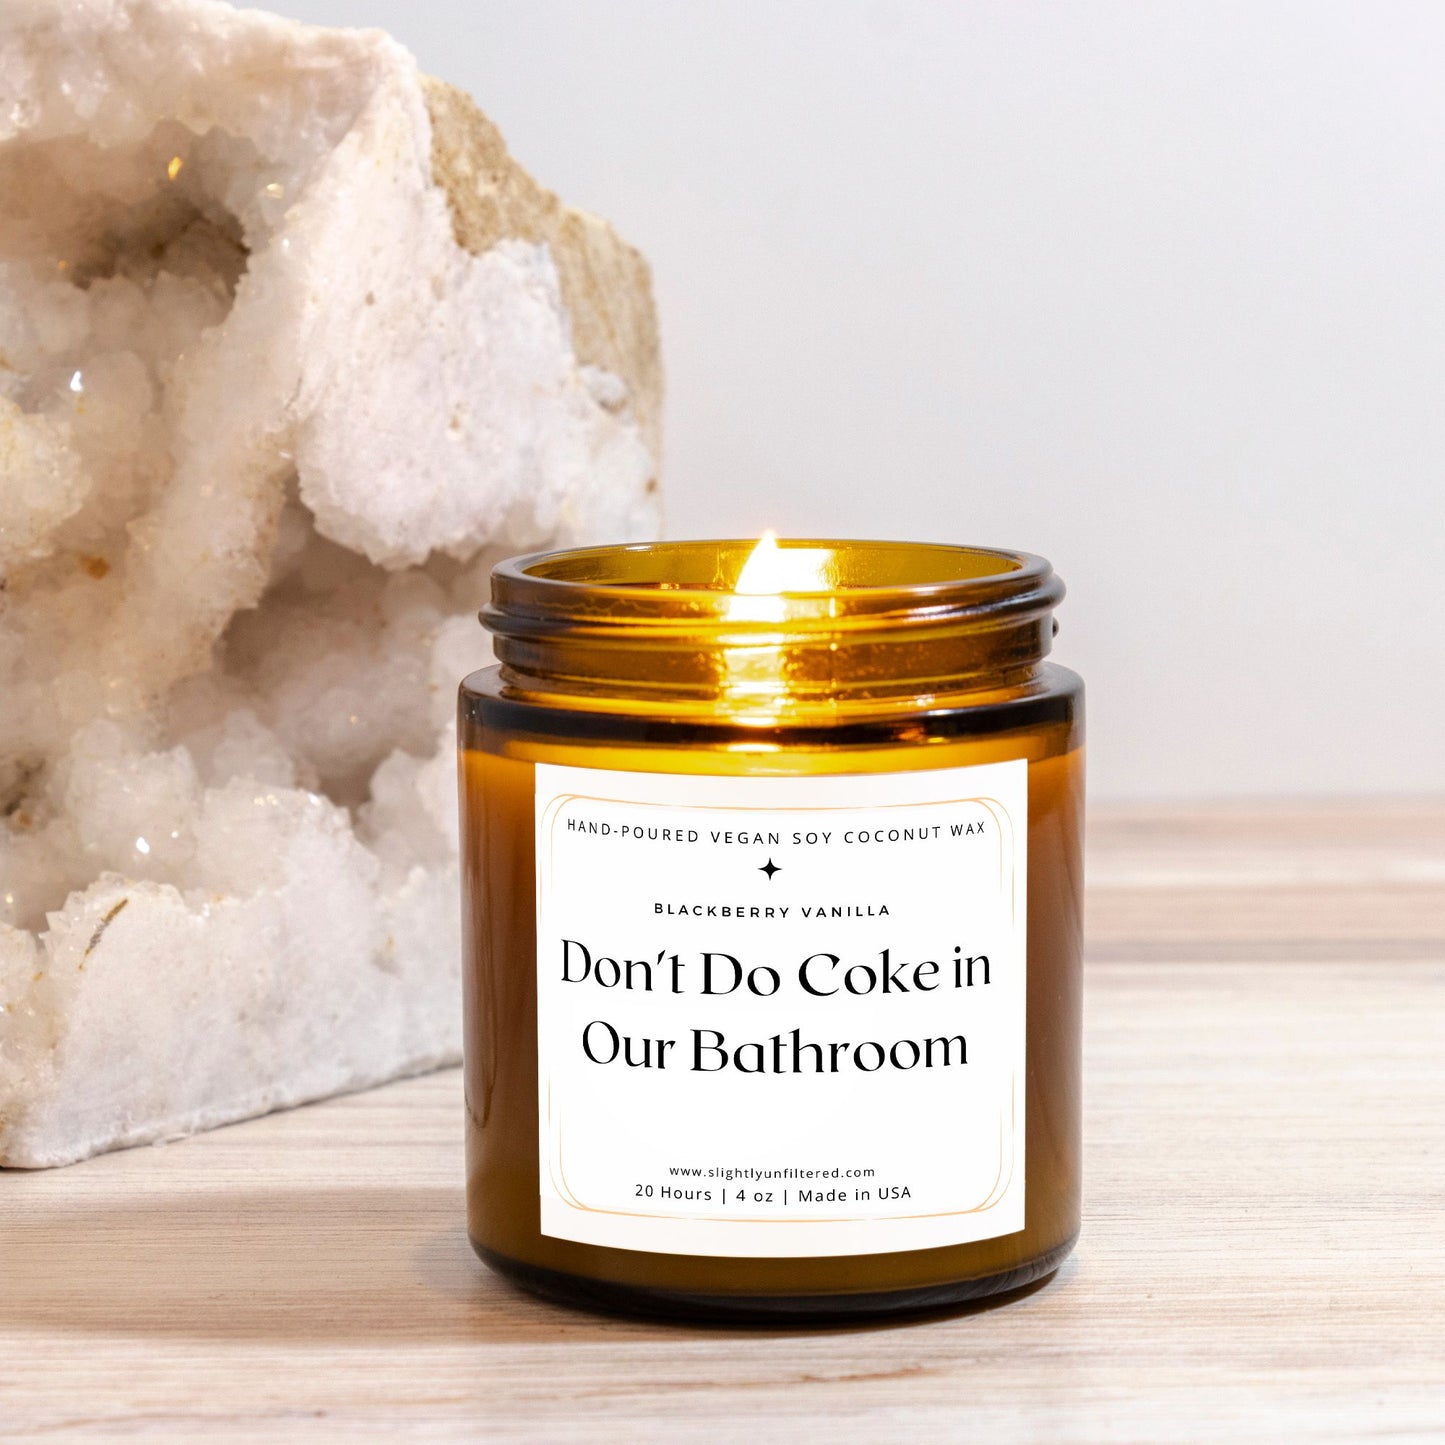 Don't Do Coke in Our Bathroom Blackberry Vanilla Candle - 4oz